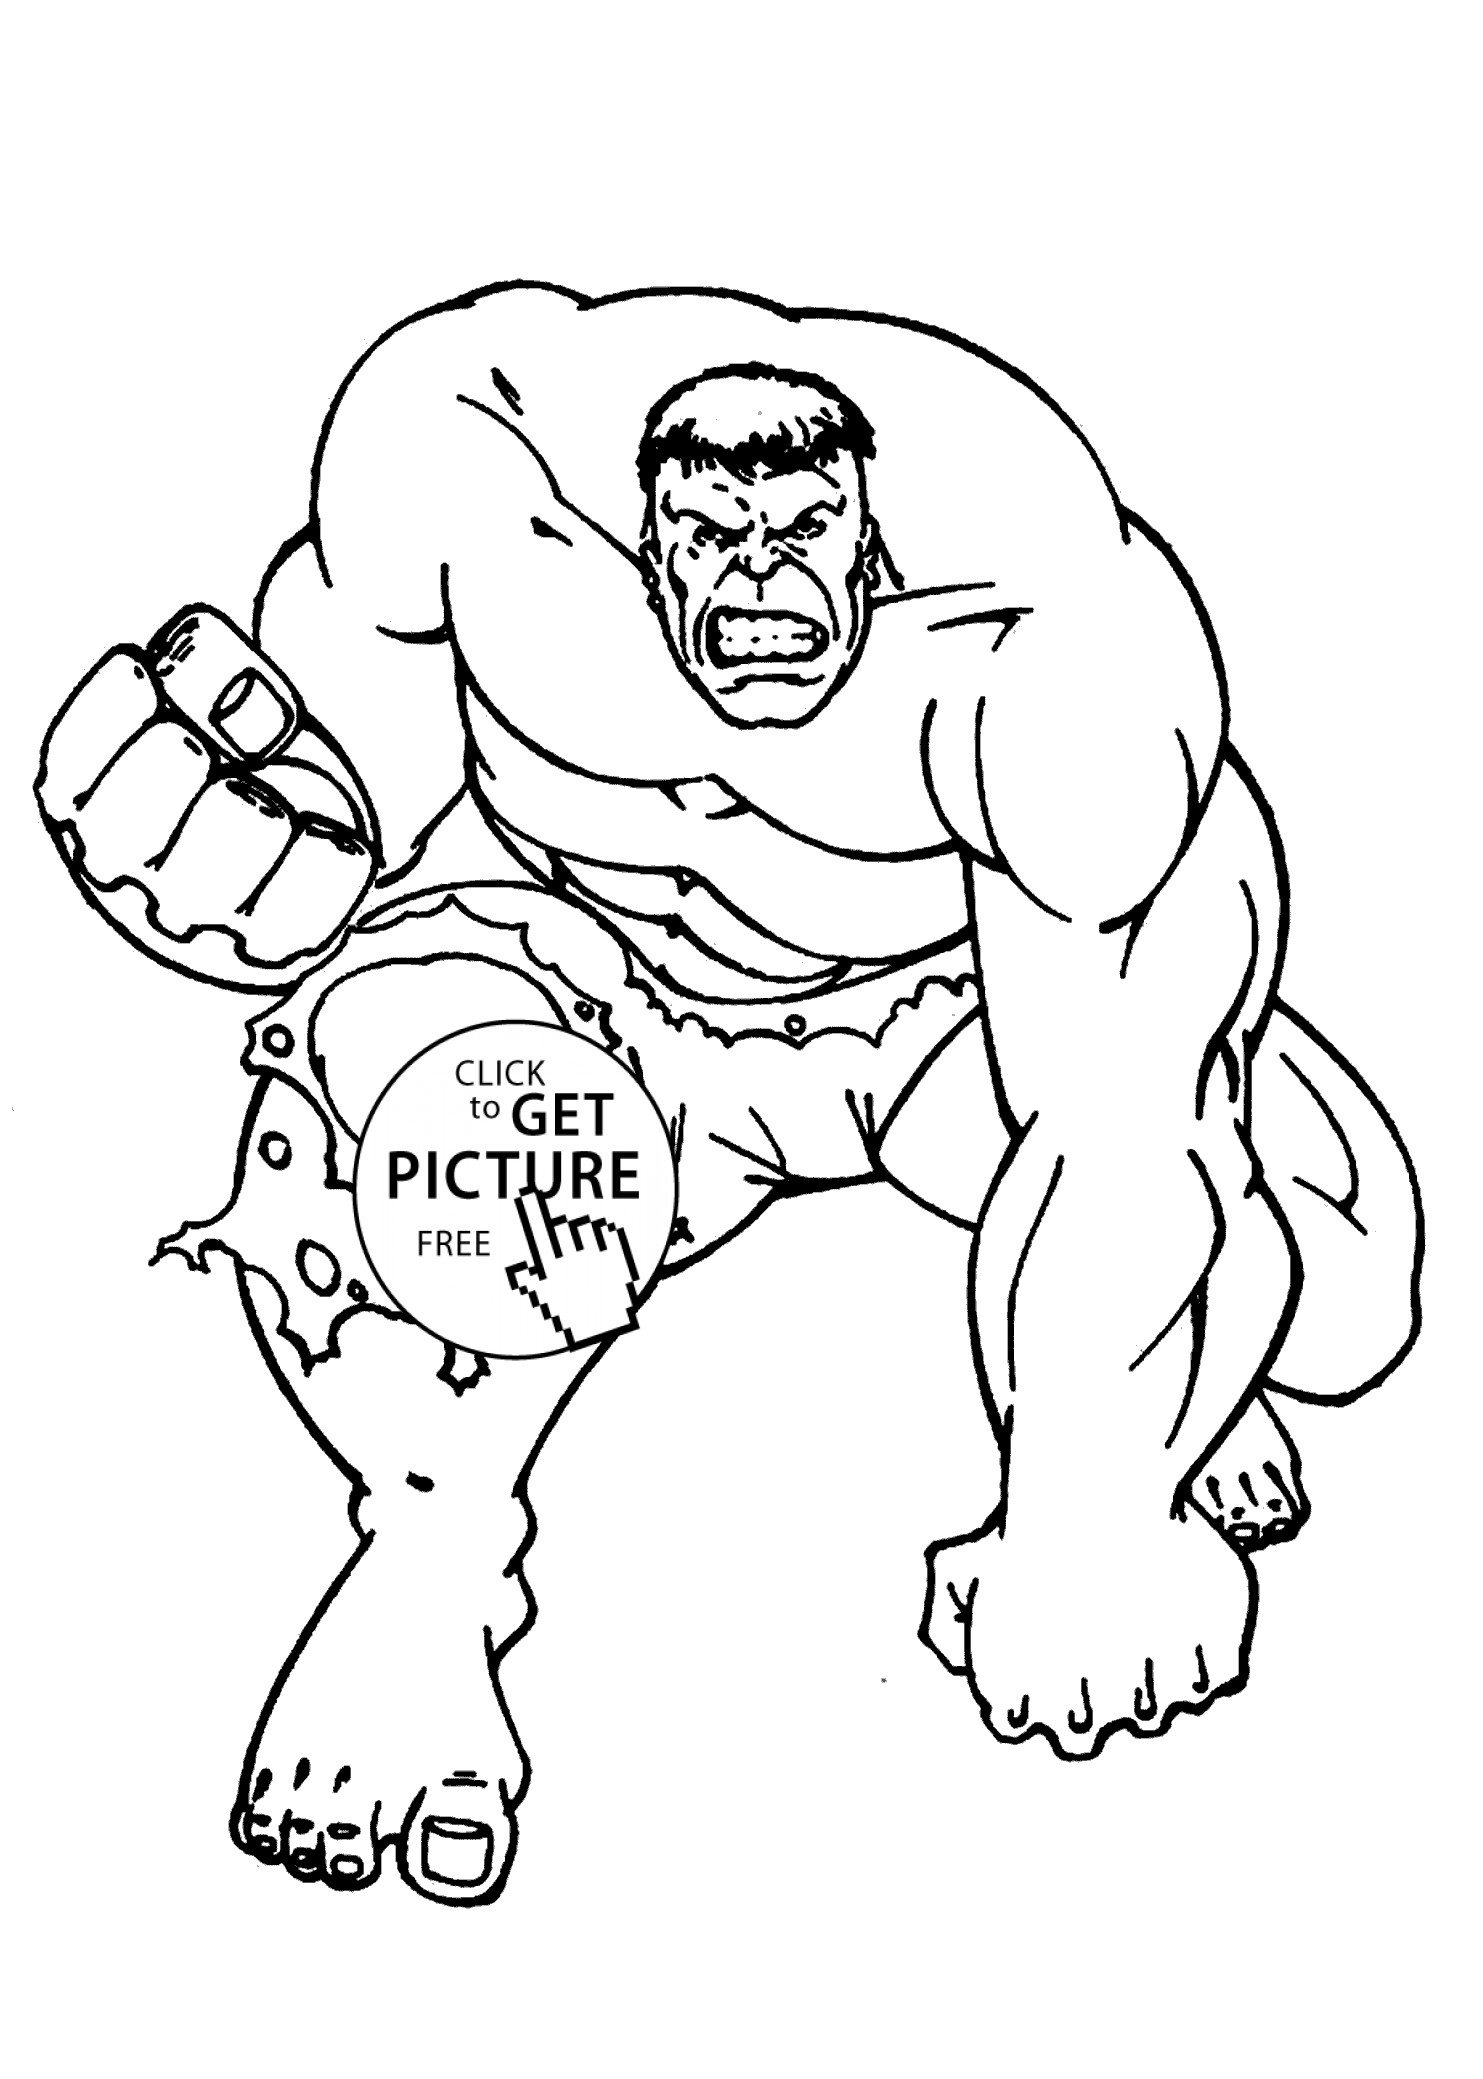 Hulk Coloring Pages For Kids
 Hulk coloring pages for kids printable free